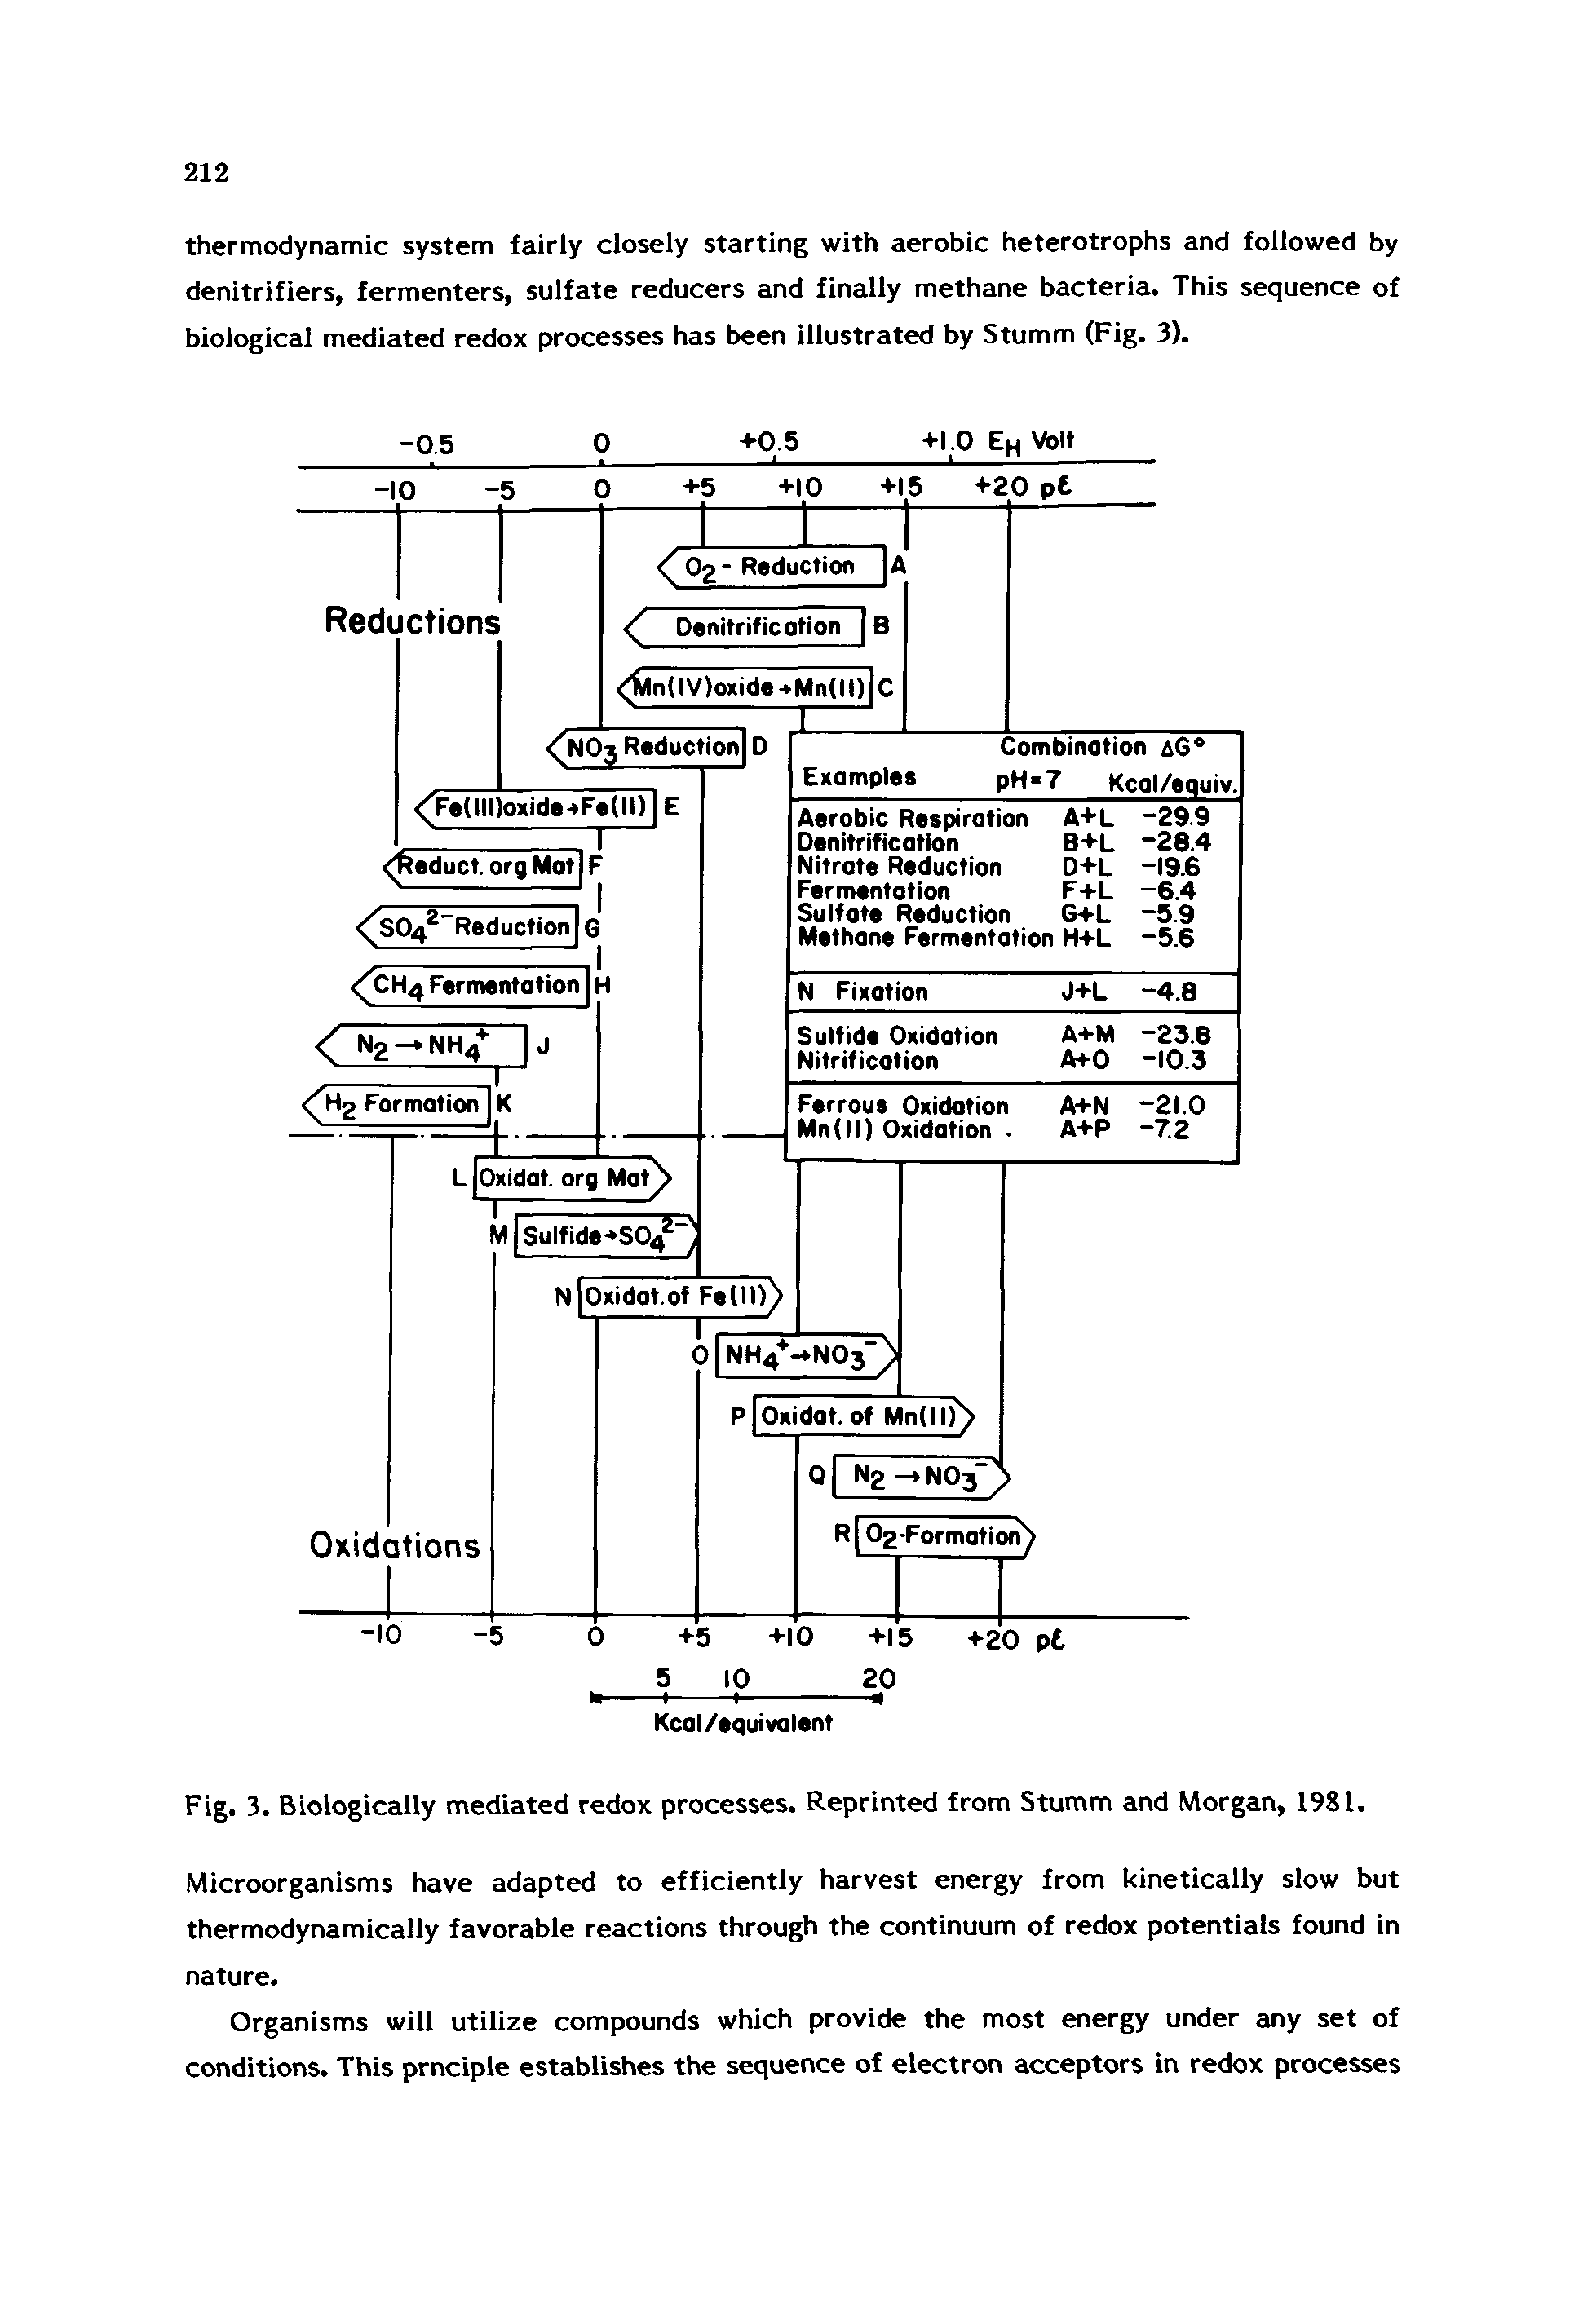 Fig. 3. Biologically mediated redox processes. Reprinted from Stumm and Morgan, 1981.